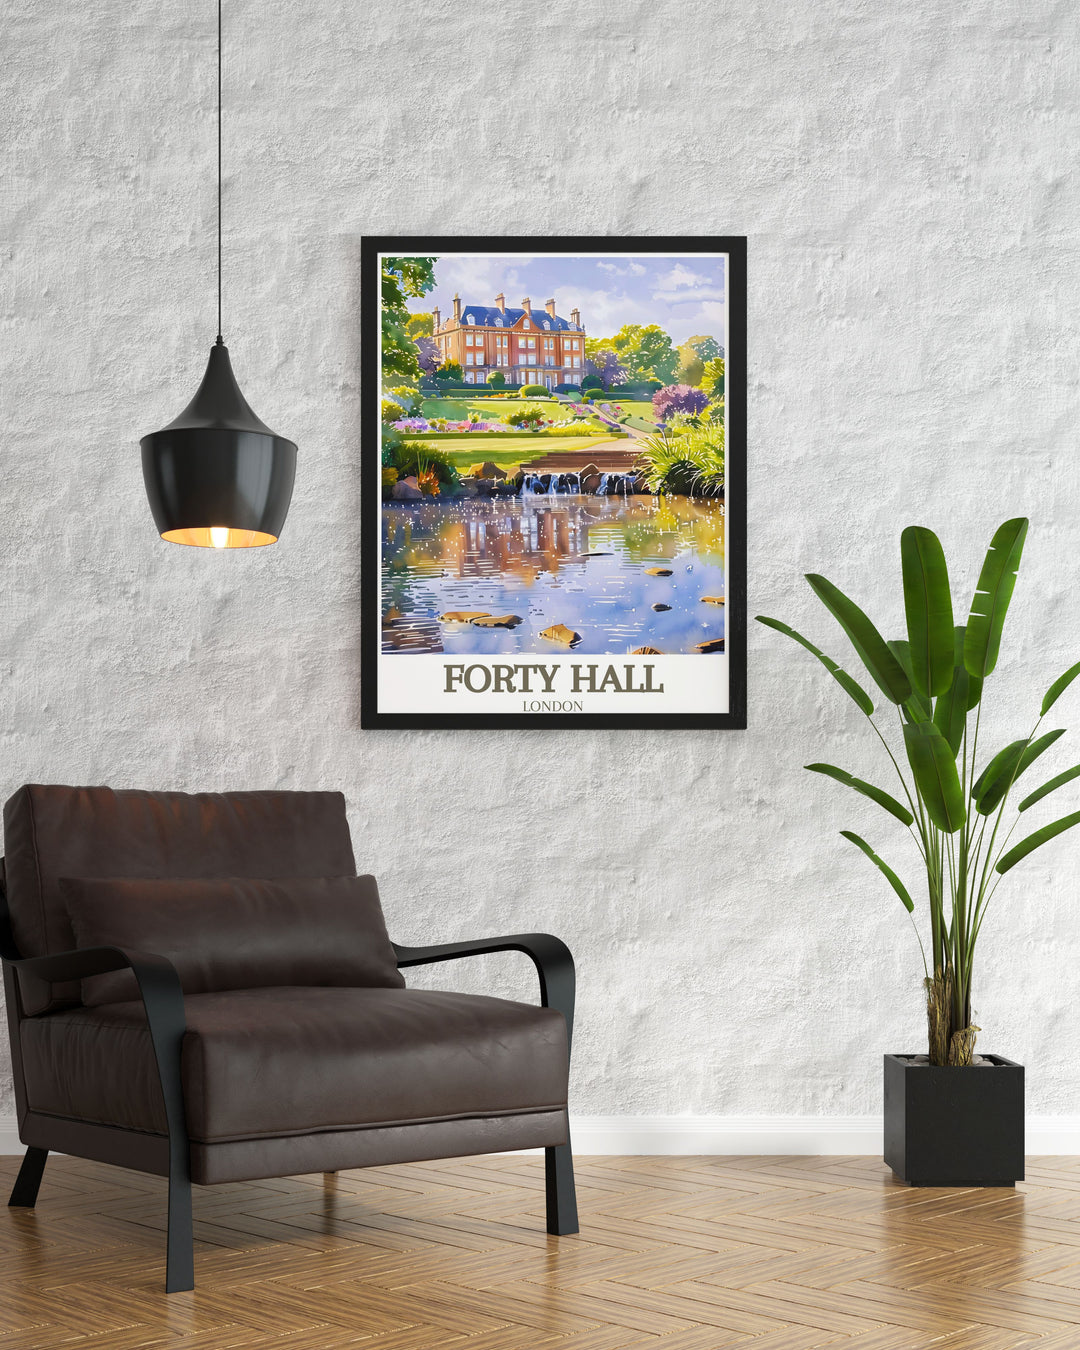 The beautiful gardens surrounding Forty Hall House are depicted, illustrating the lush greenery and tranquil ambiance of Forty Hill.